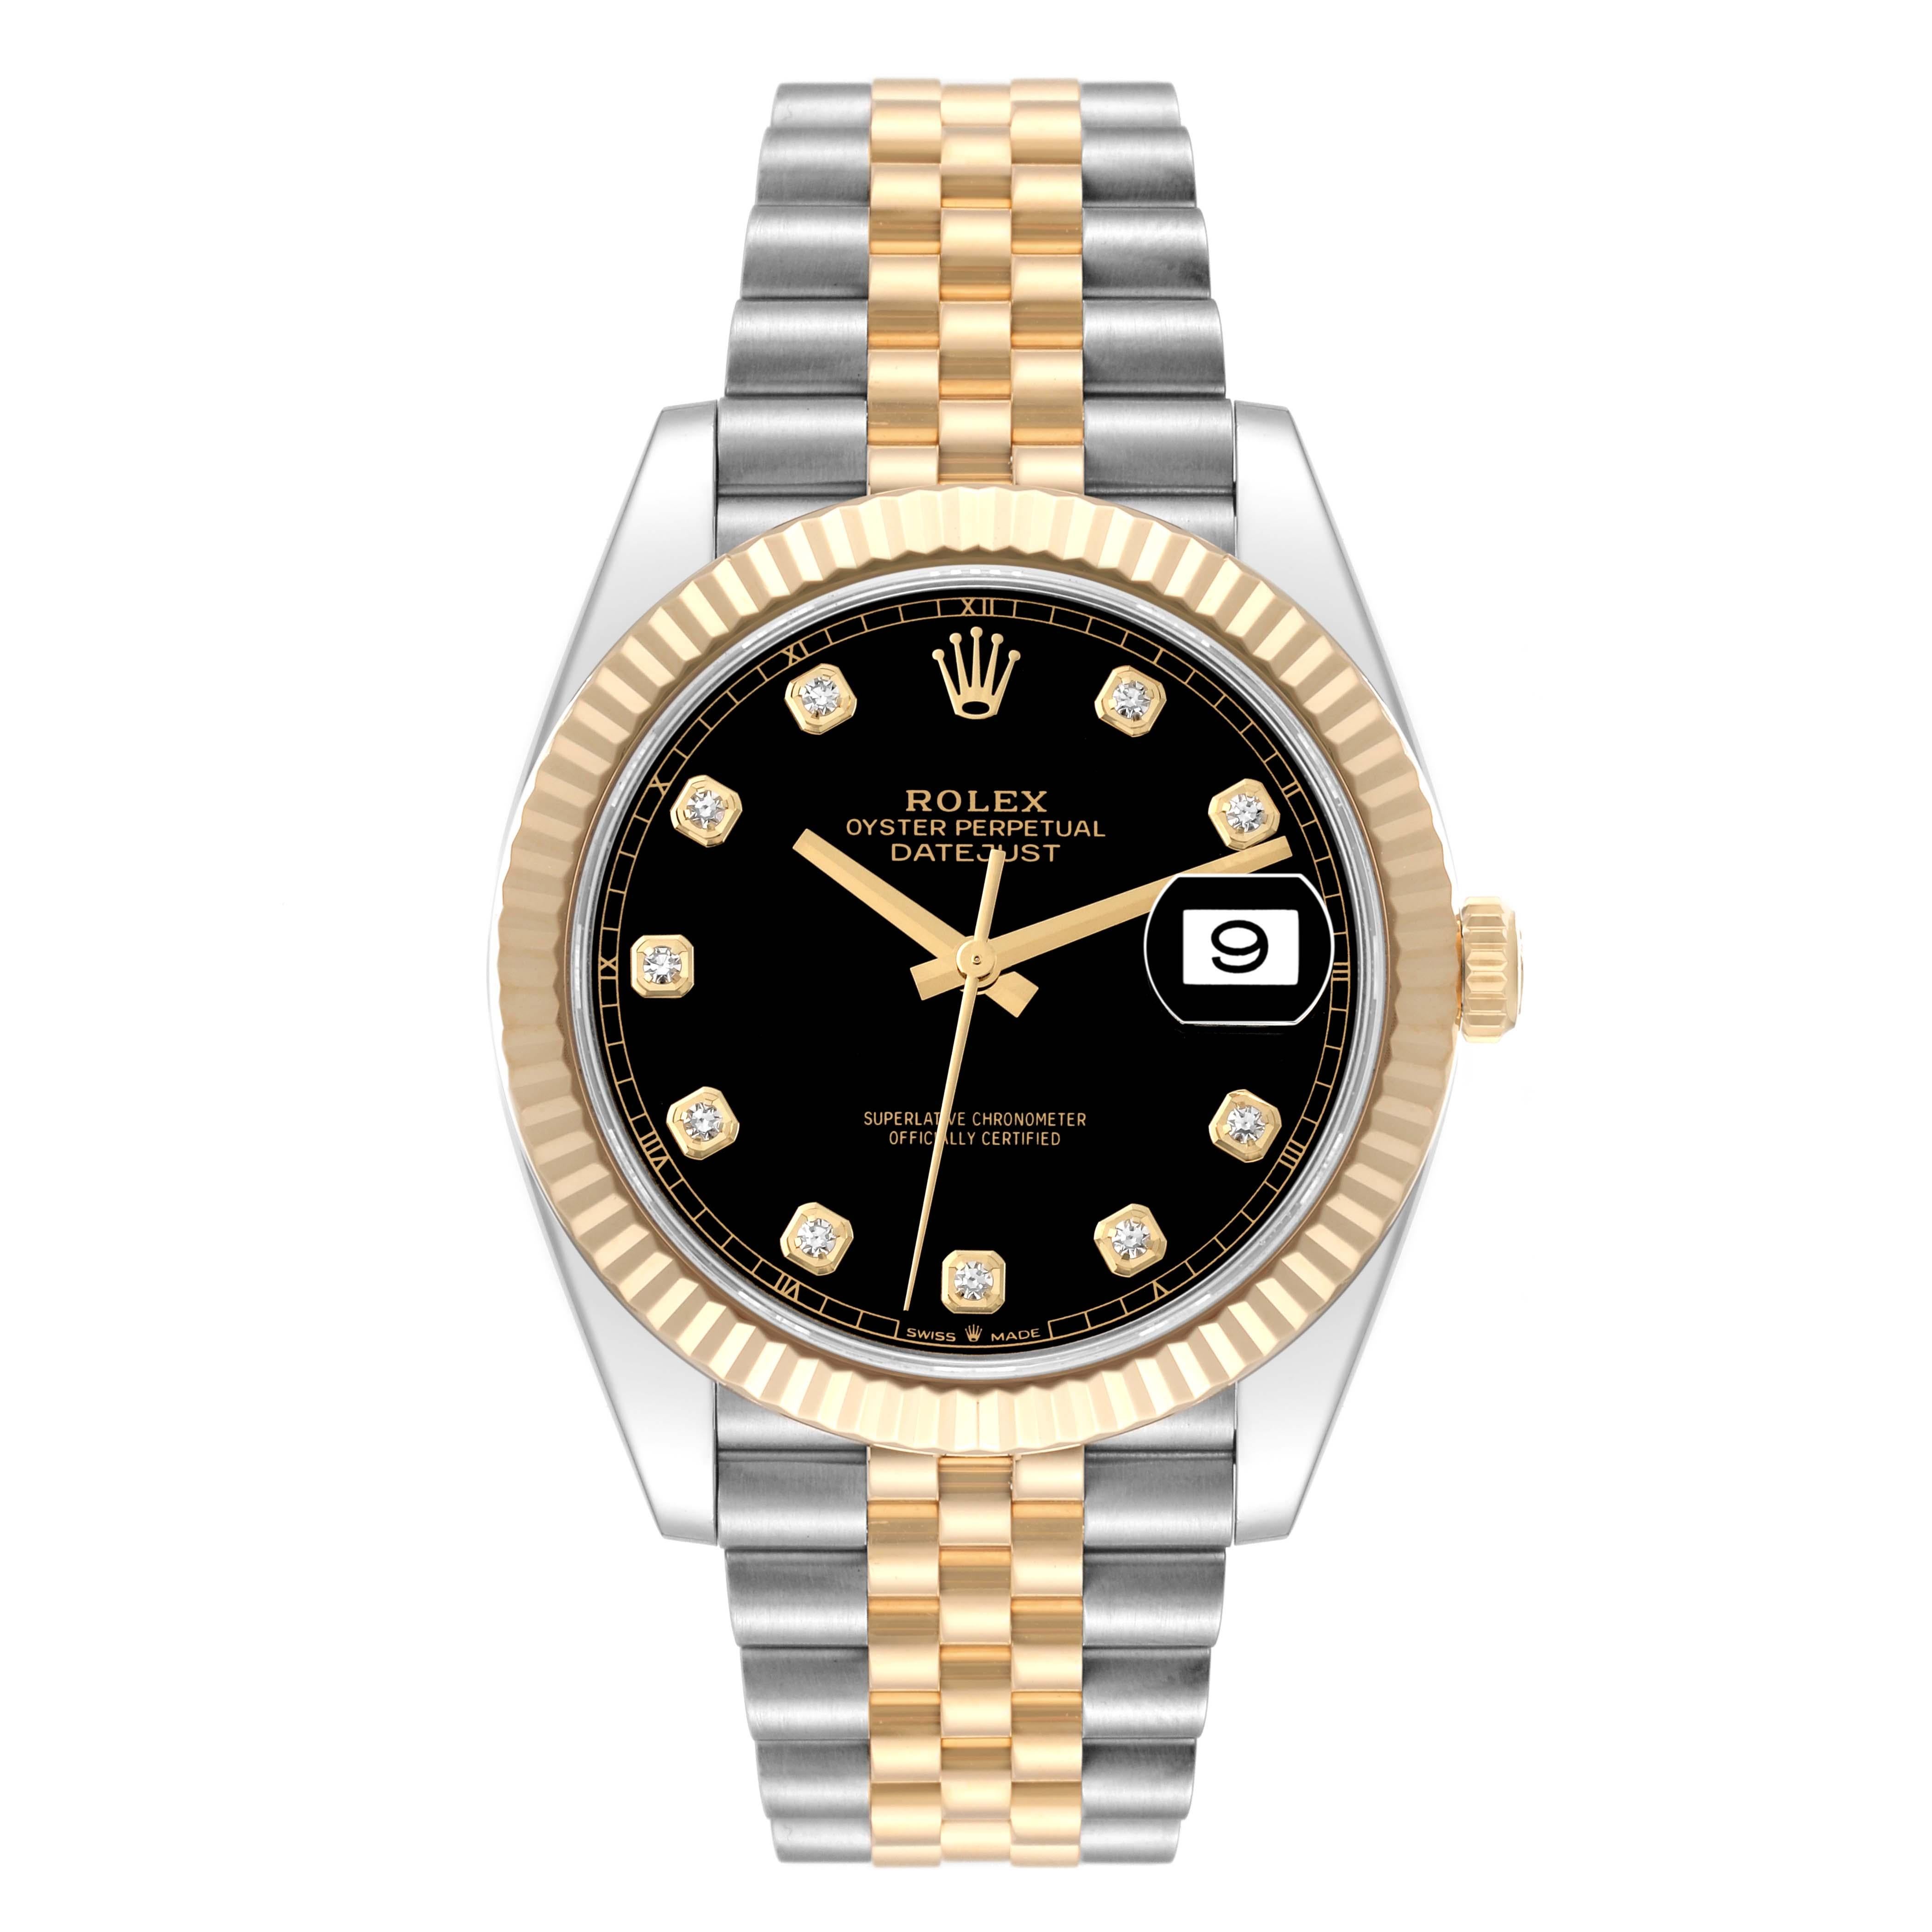 Rolex Datejust 41 Steel Yellow Gold Diamond Dial Mens Watch 126333 Box Card. Officially certified chronometer automatic self-winding movement. Stainless steel and 18K yellow gold case 41.0 mm in diameter. Rolex logo on a crown. 18K yellow gold